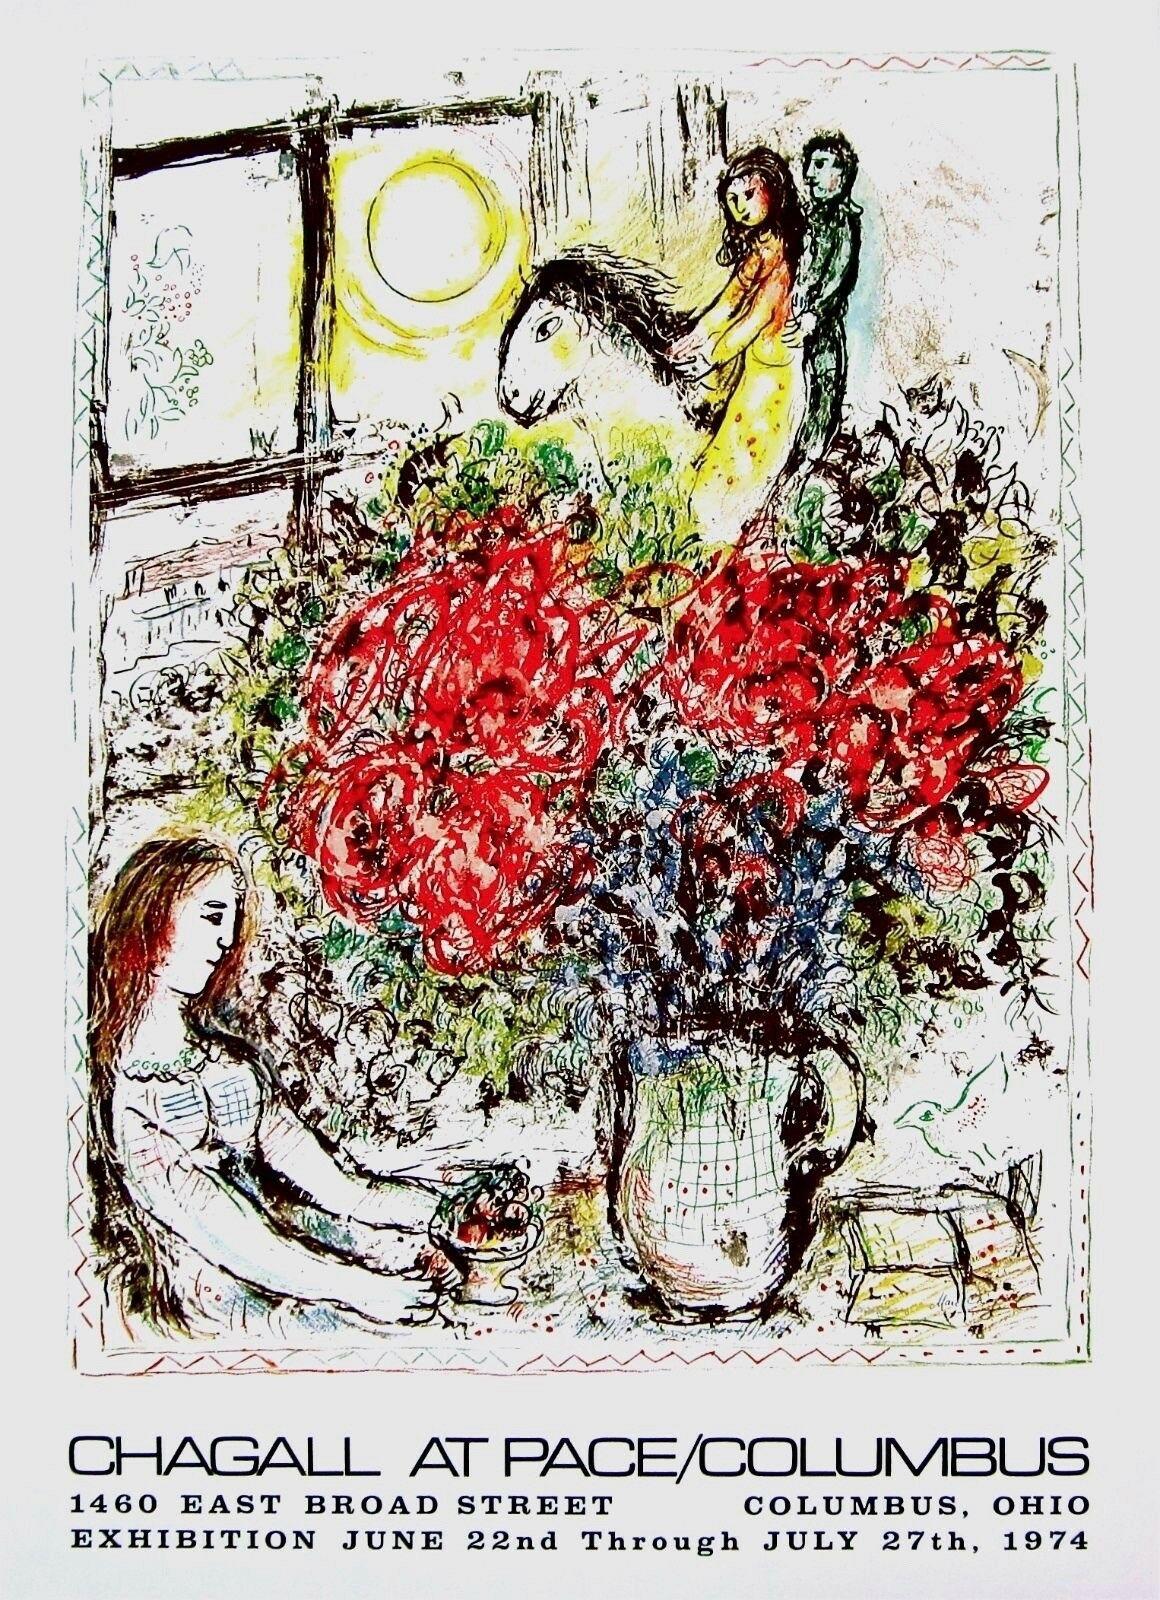 Marc Chagall Landscape Print - Chagall at Pace Columbus, 1974 Exhibition Offset Lithograph